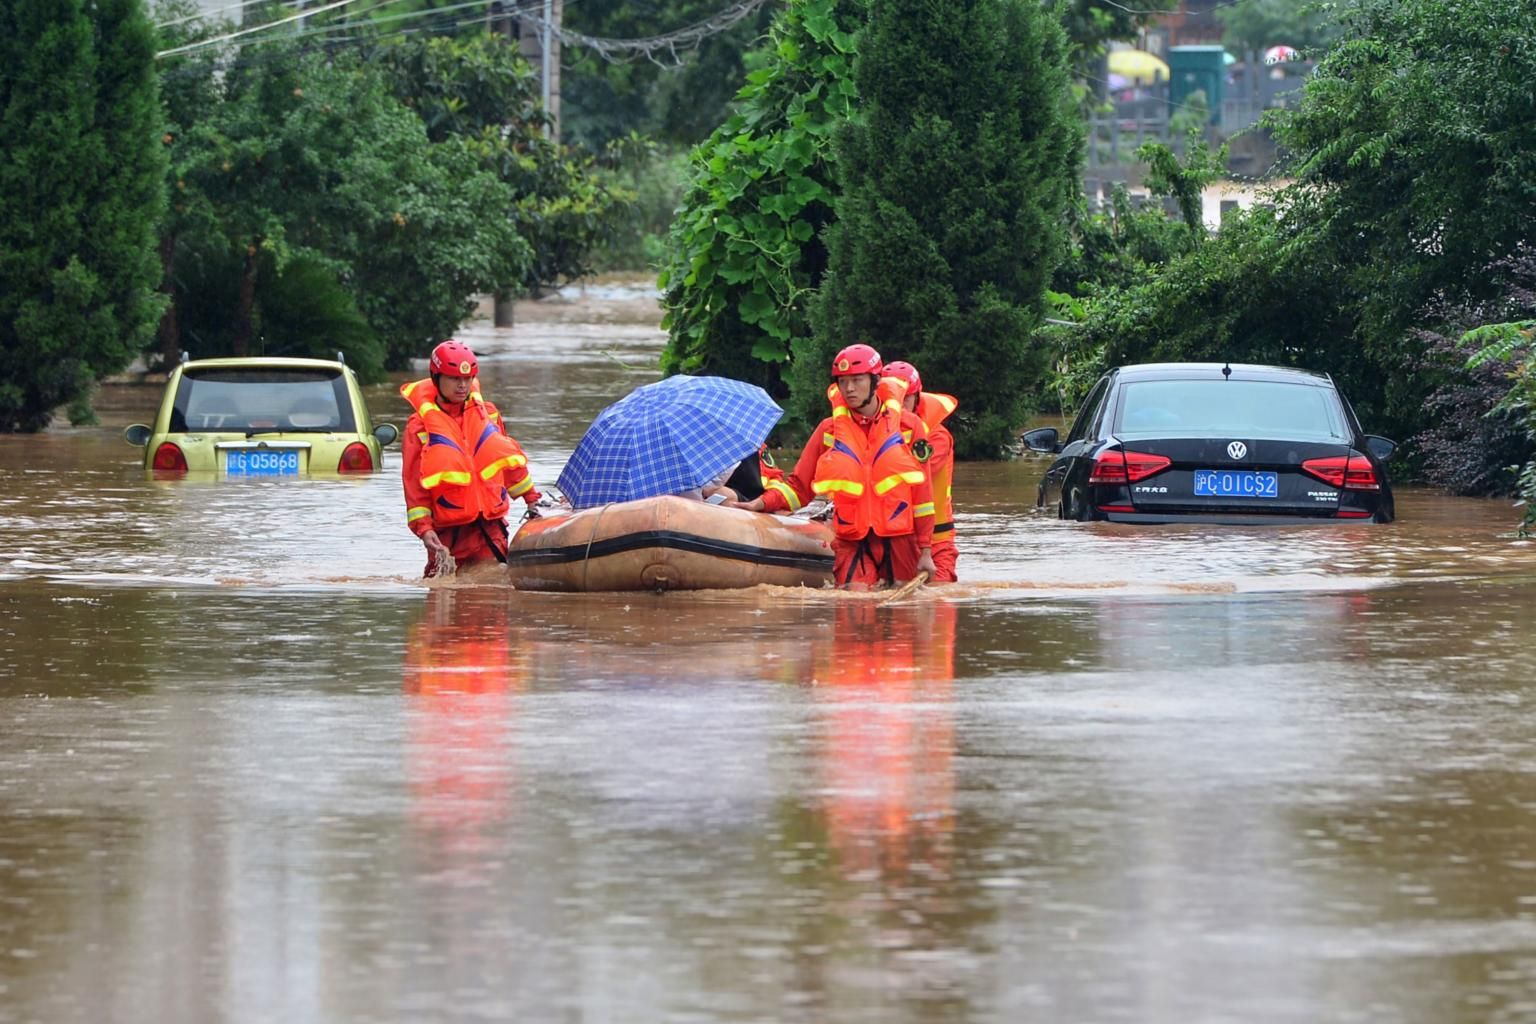 Torrential rains are threatening lives in China, causing severe flooding & landslides. How will China be impacted as this hazardous weather persists?